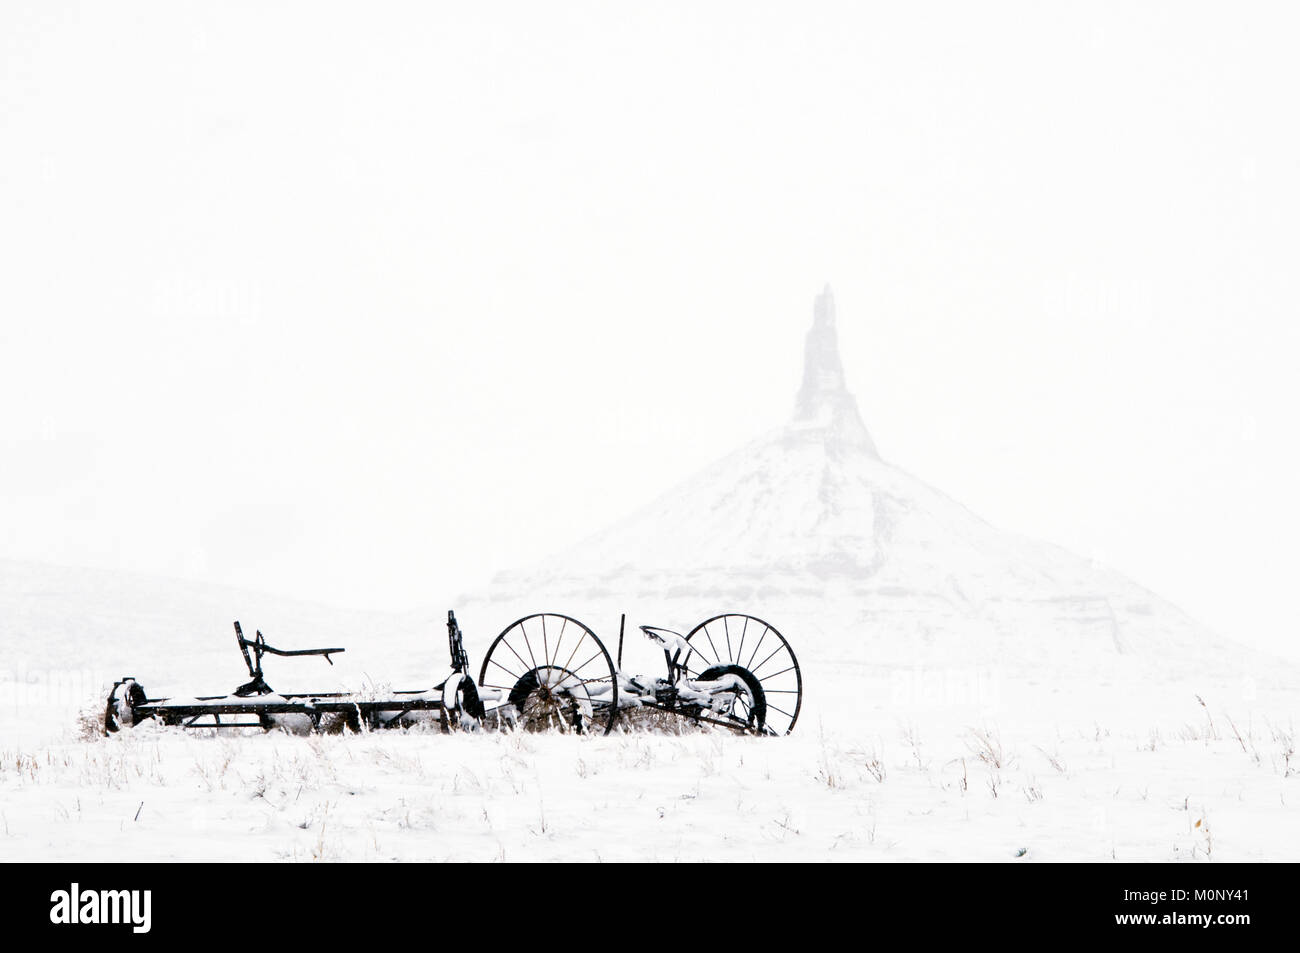 Chimney Rock National Historic Site in snow Stock Photo